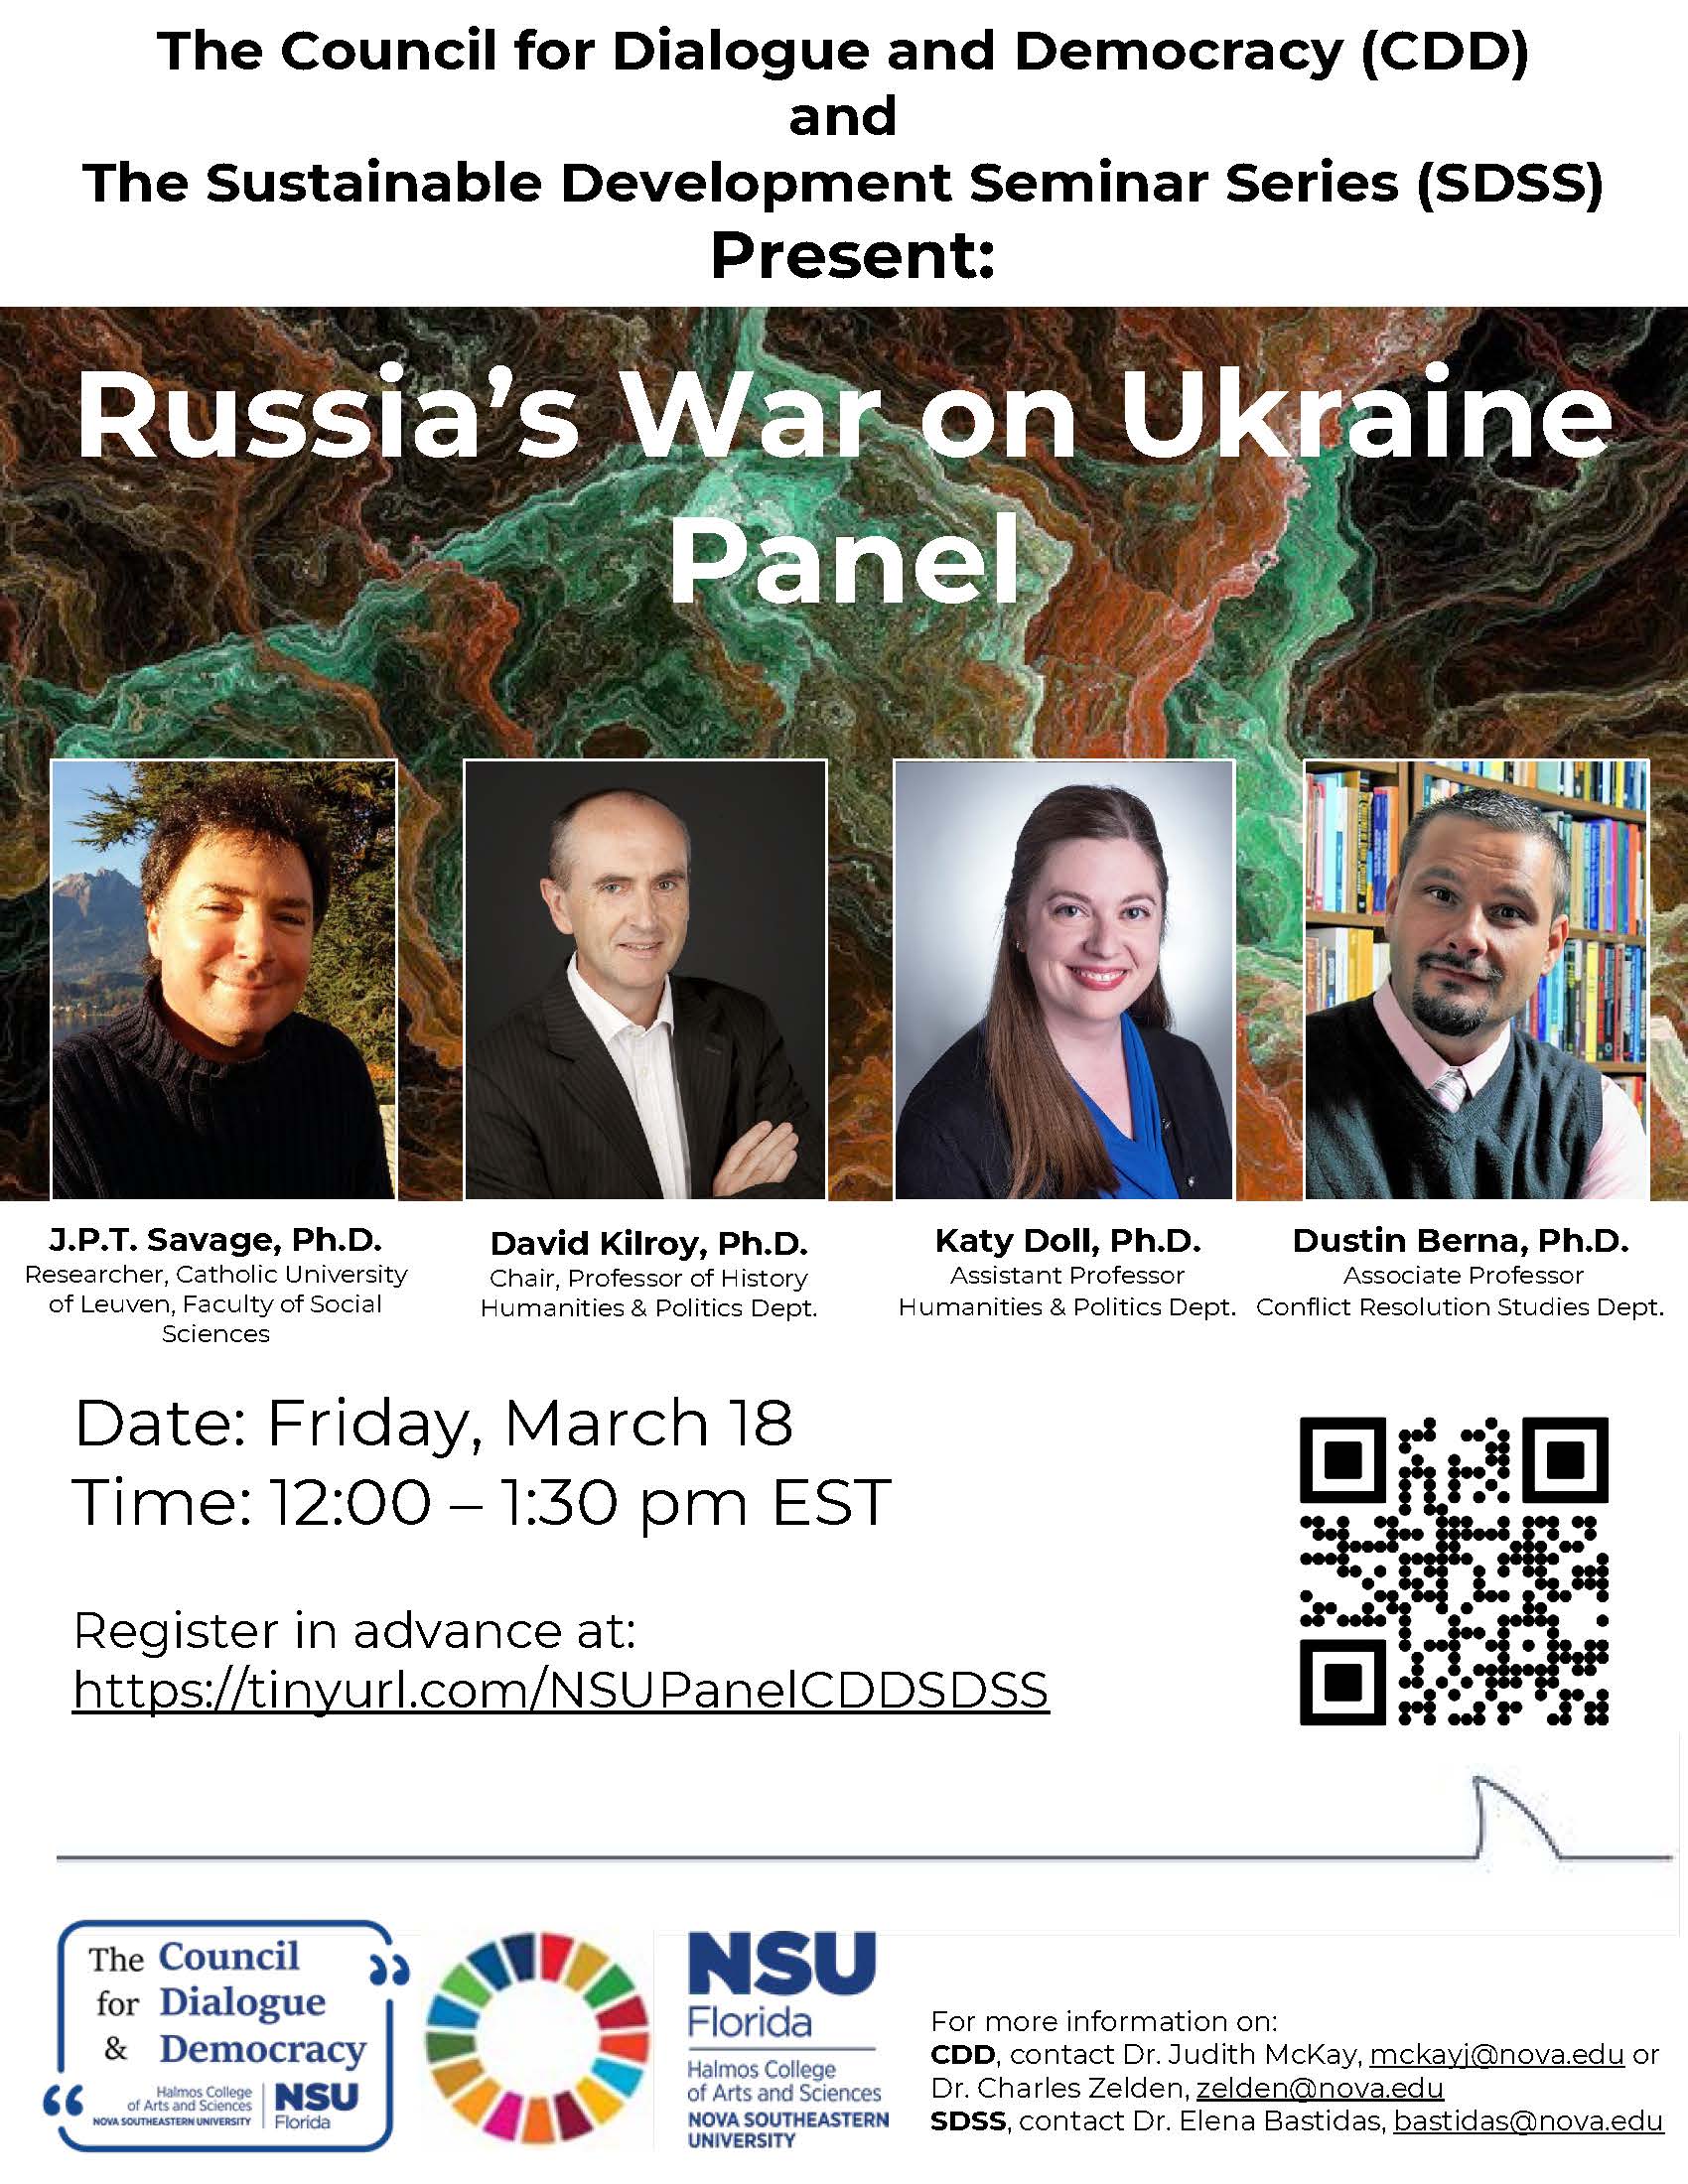 flyer with photos of speakers and link to register for the webinar on March 18 at 12pm EST